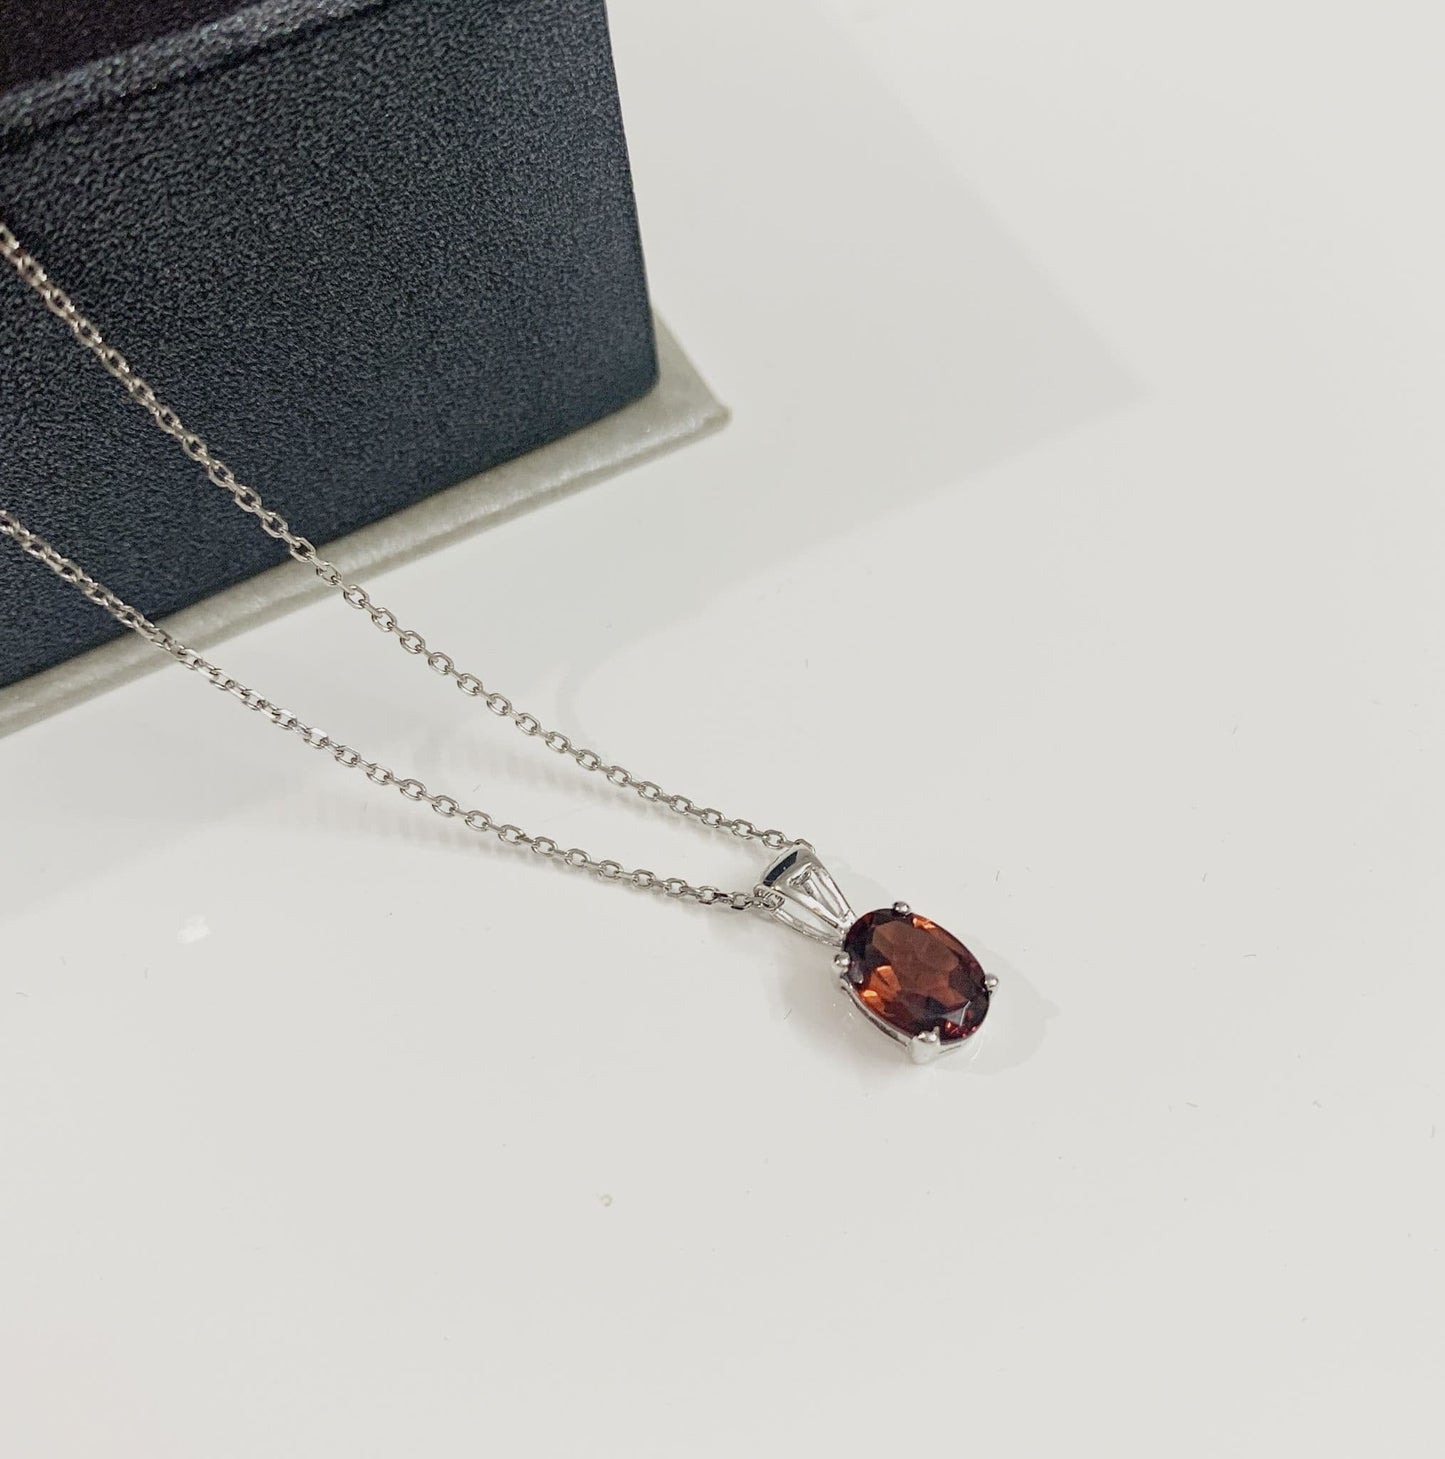 Oval red garnet necklace pendant white gold